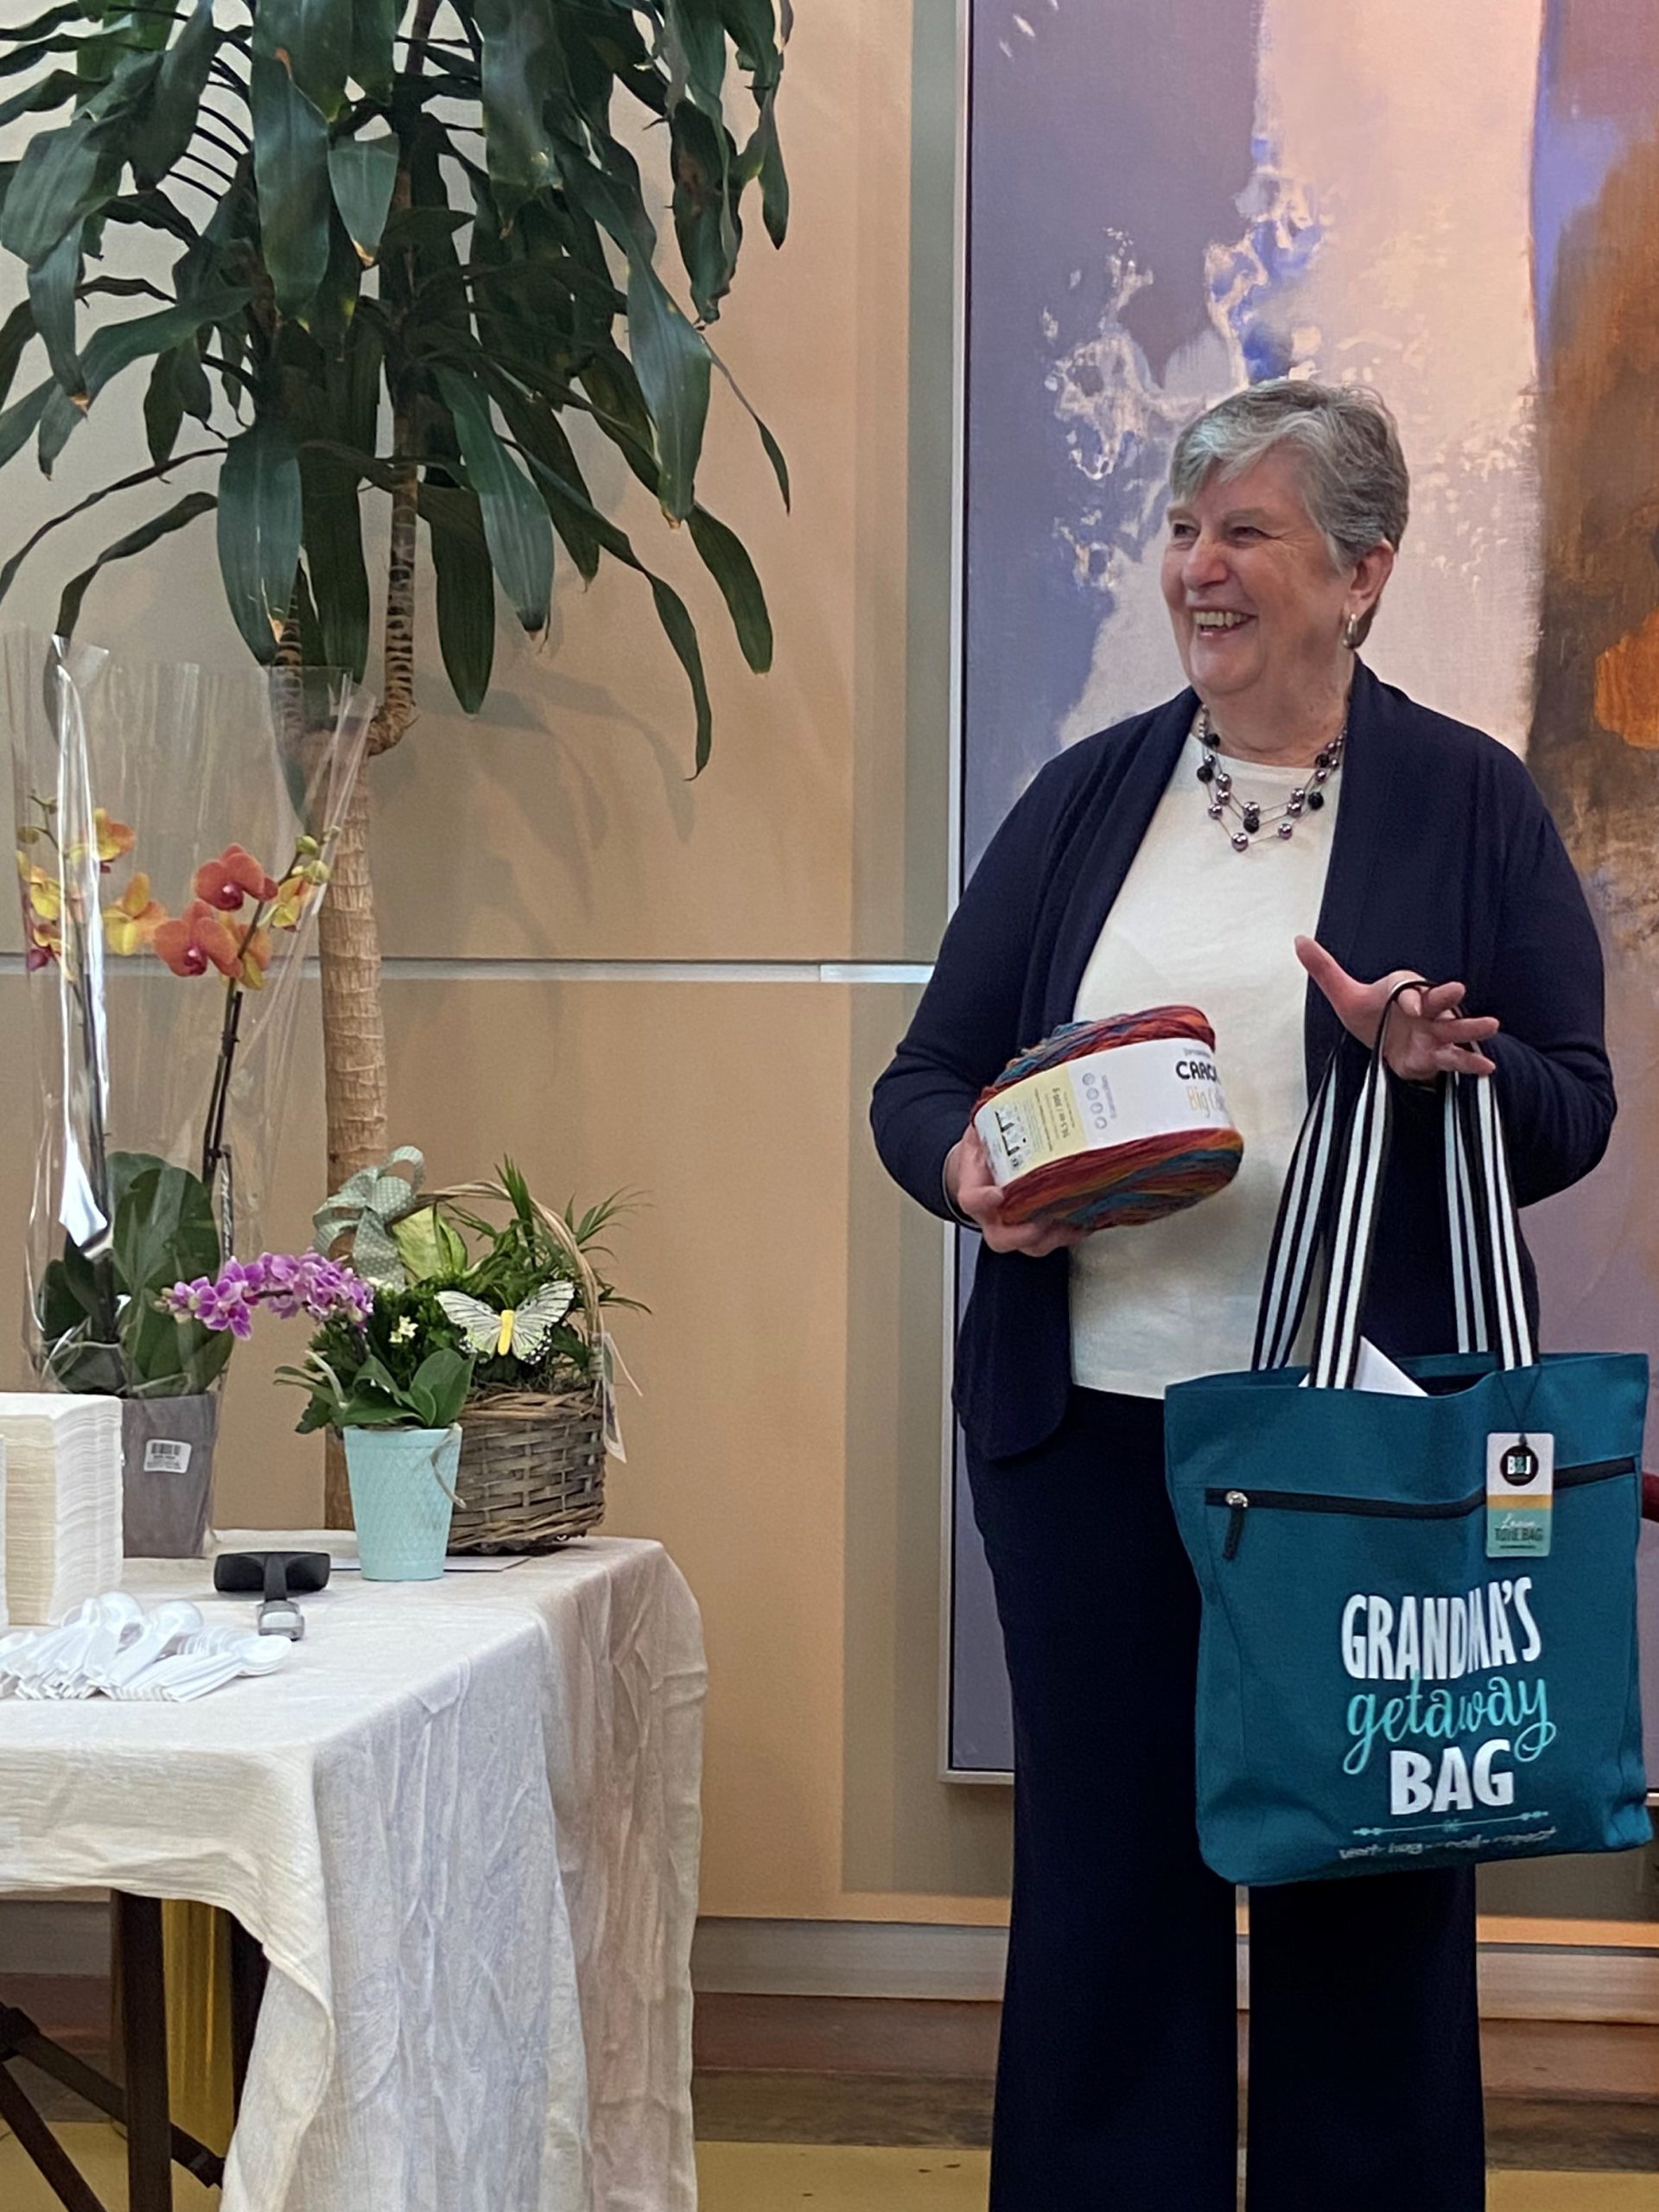 Rosemary standing at her retirement party holding gifts including a big that says "Grandma's Getaway Bag"